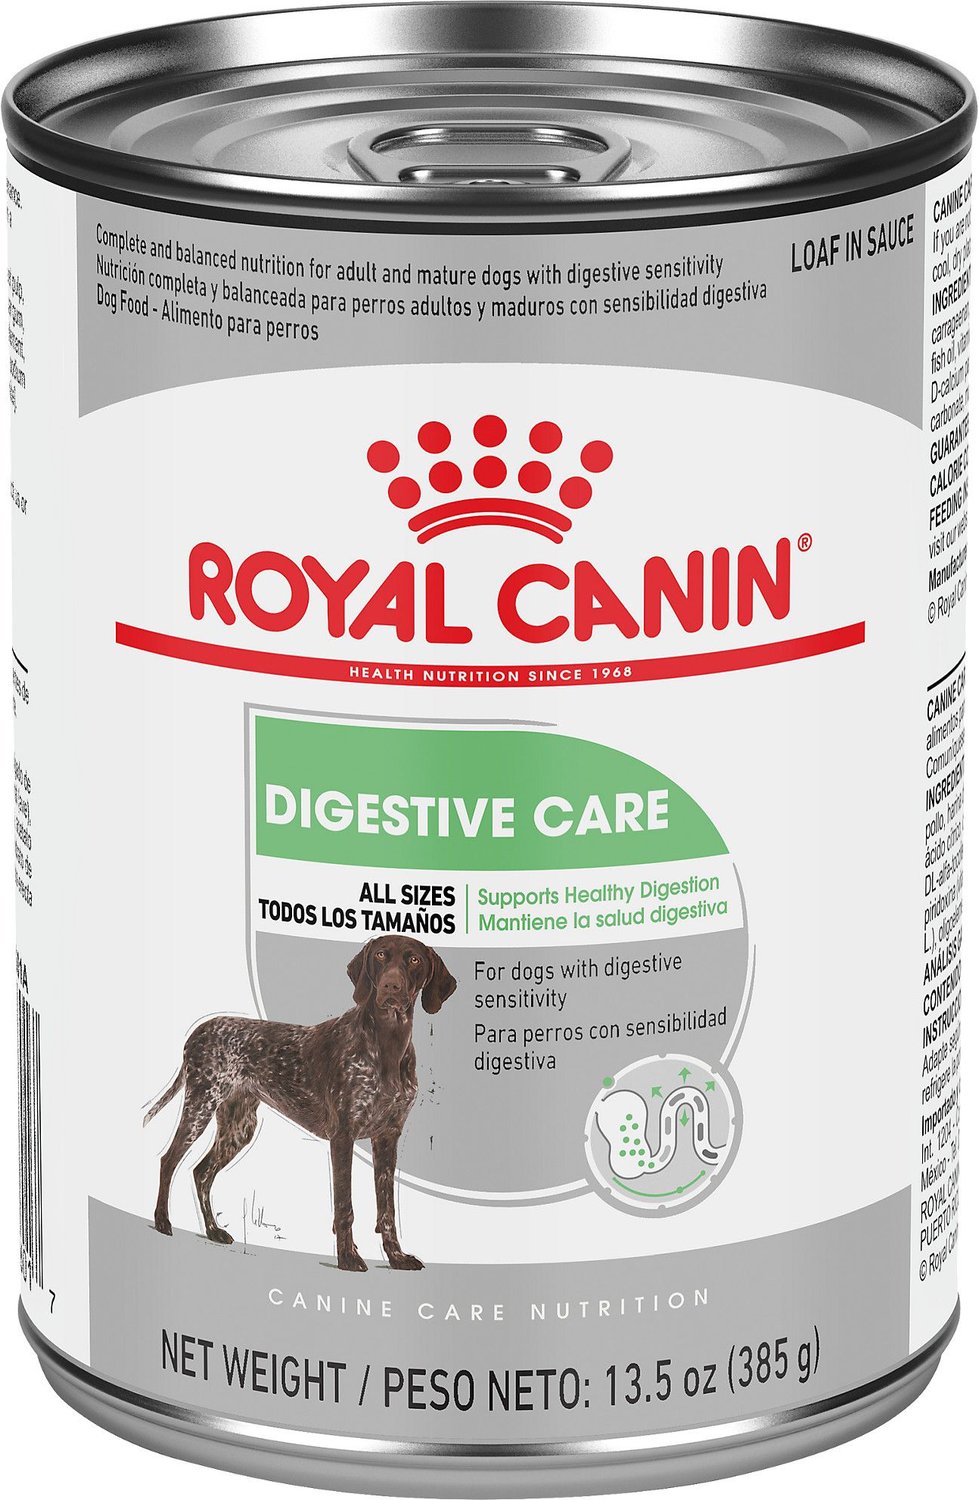 royal canin hypoallergenic dog food wet